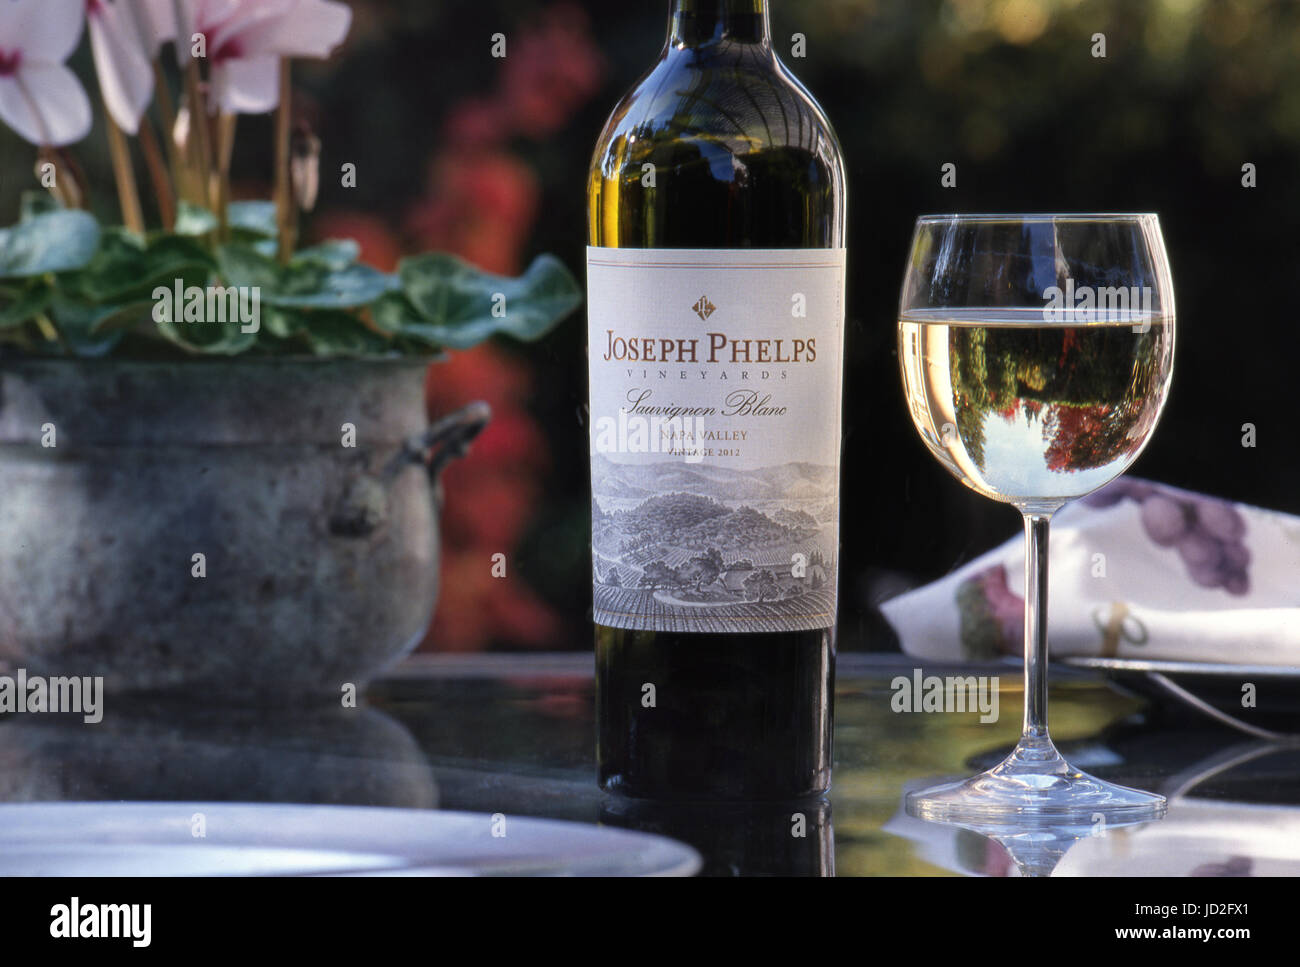 Joseph Phelps Sauvignon Blanc white wine bottle and glass, with floral reflections on stylish alfresco lunch table, Napa Valley, California. USA Stock Photo